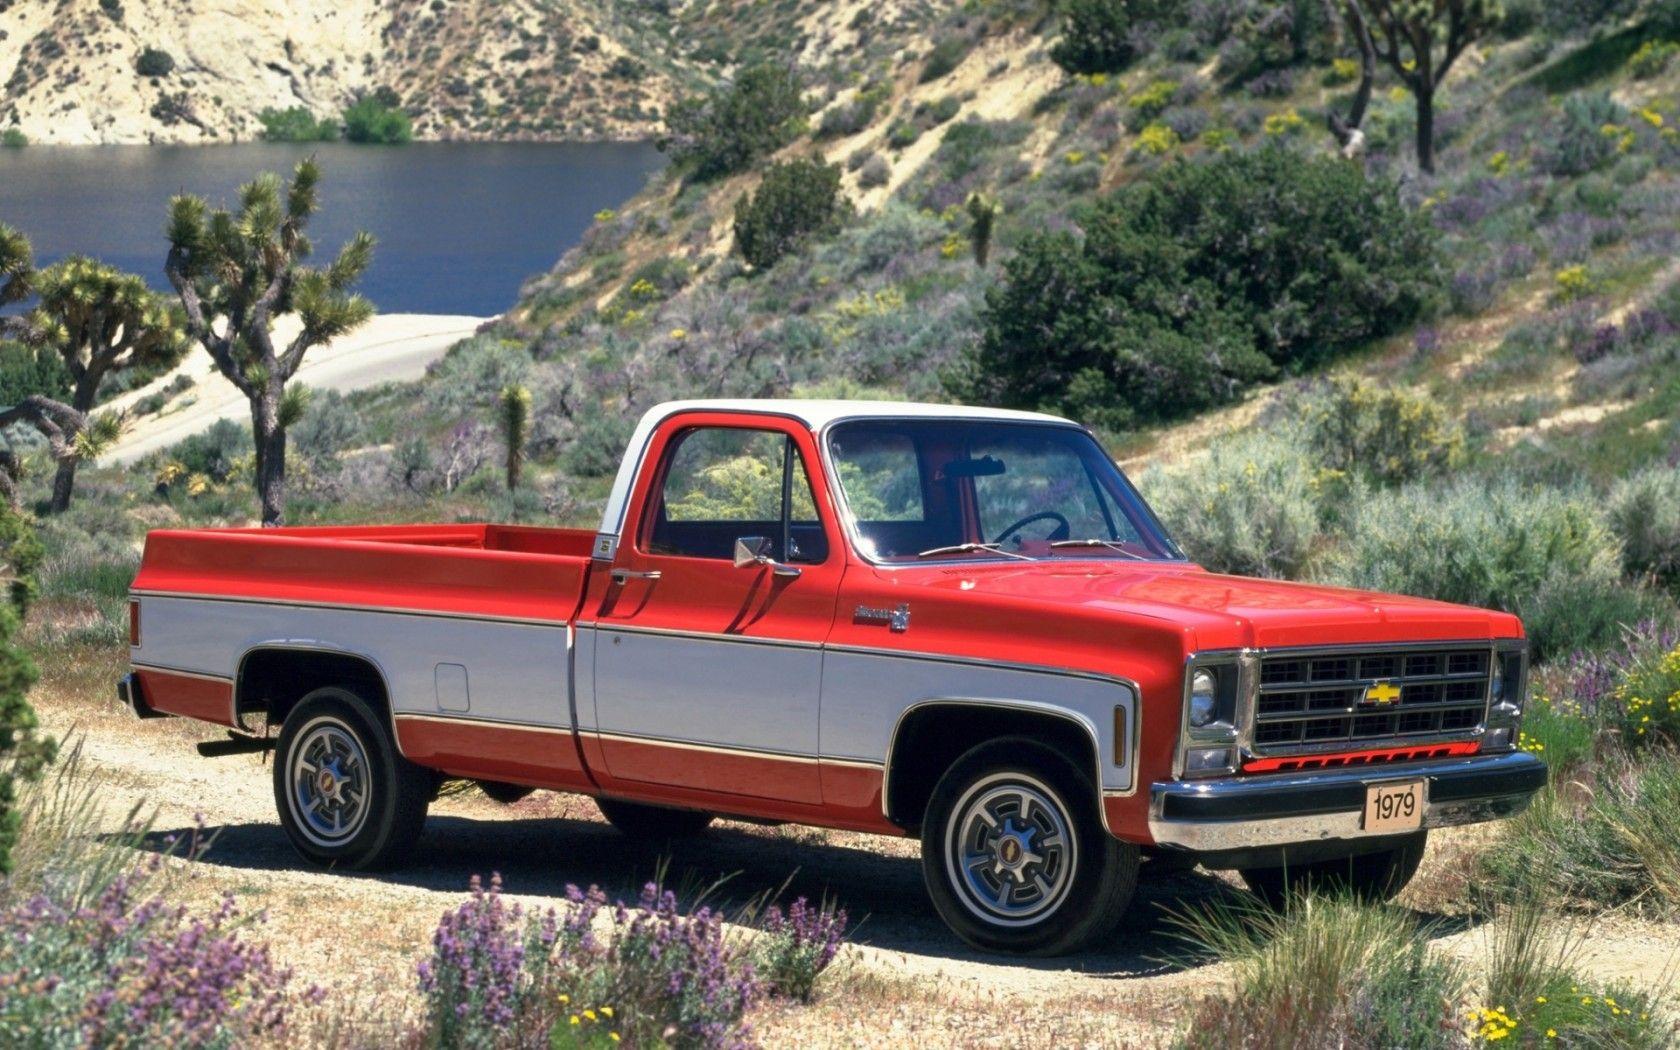 Classic Chevy Truck Wallpapers - Top Free Classic Chevy Truck